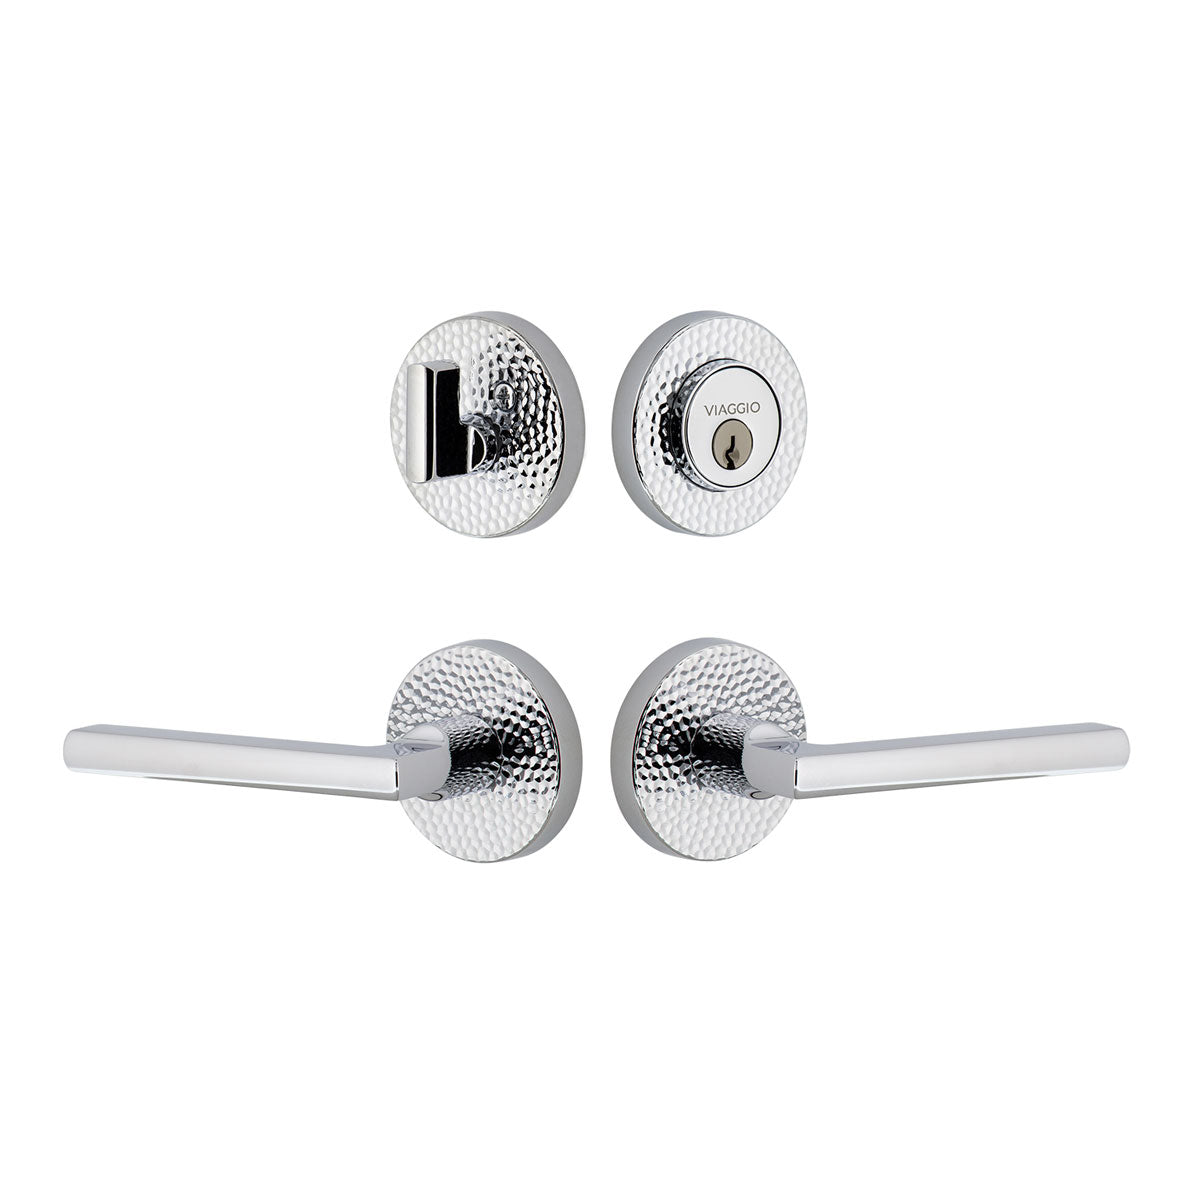 Circolo Hammered Rosette Entry Set with Milano Lever in Bright Chrome